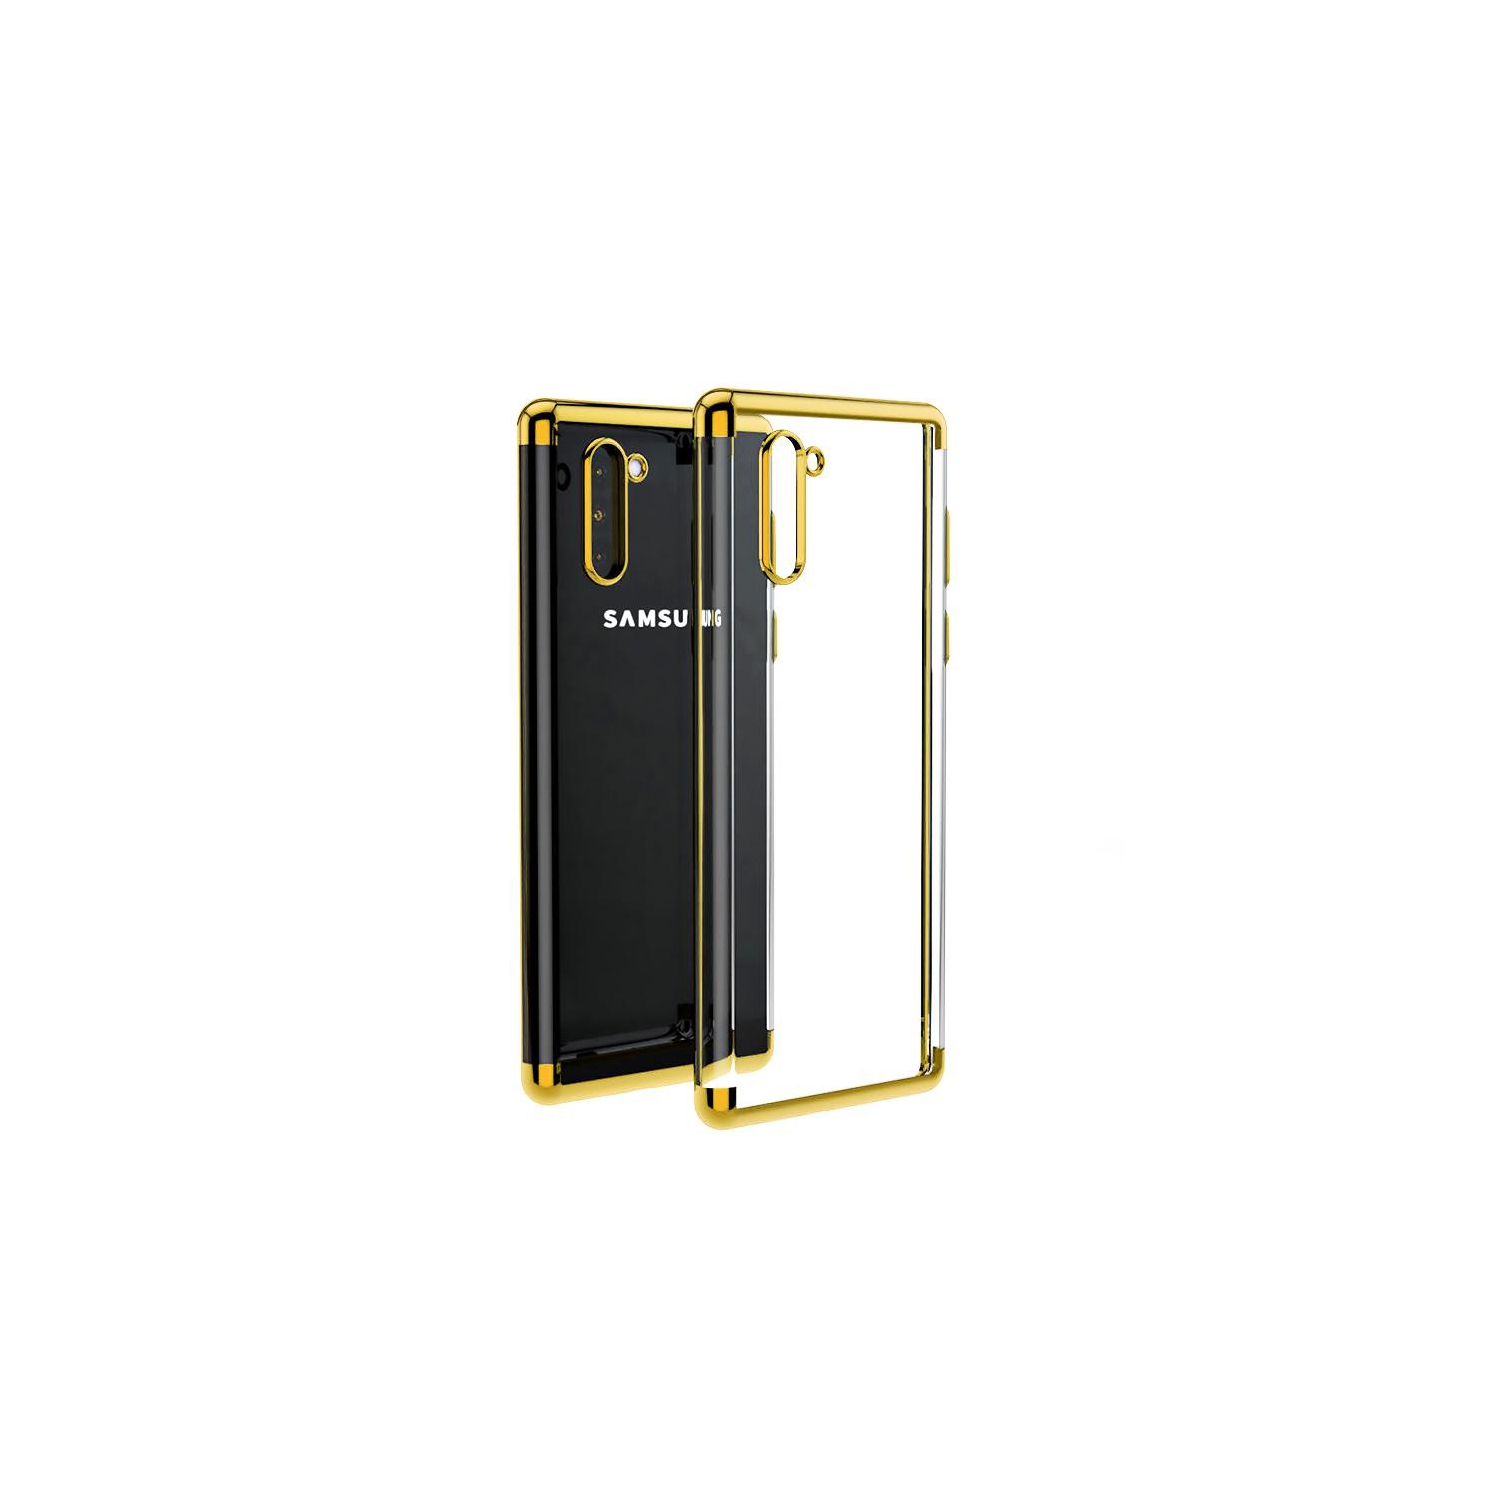 PANDACO Gold Trim Clear Case for Samsung Galaxy Note 10